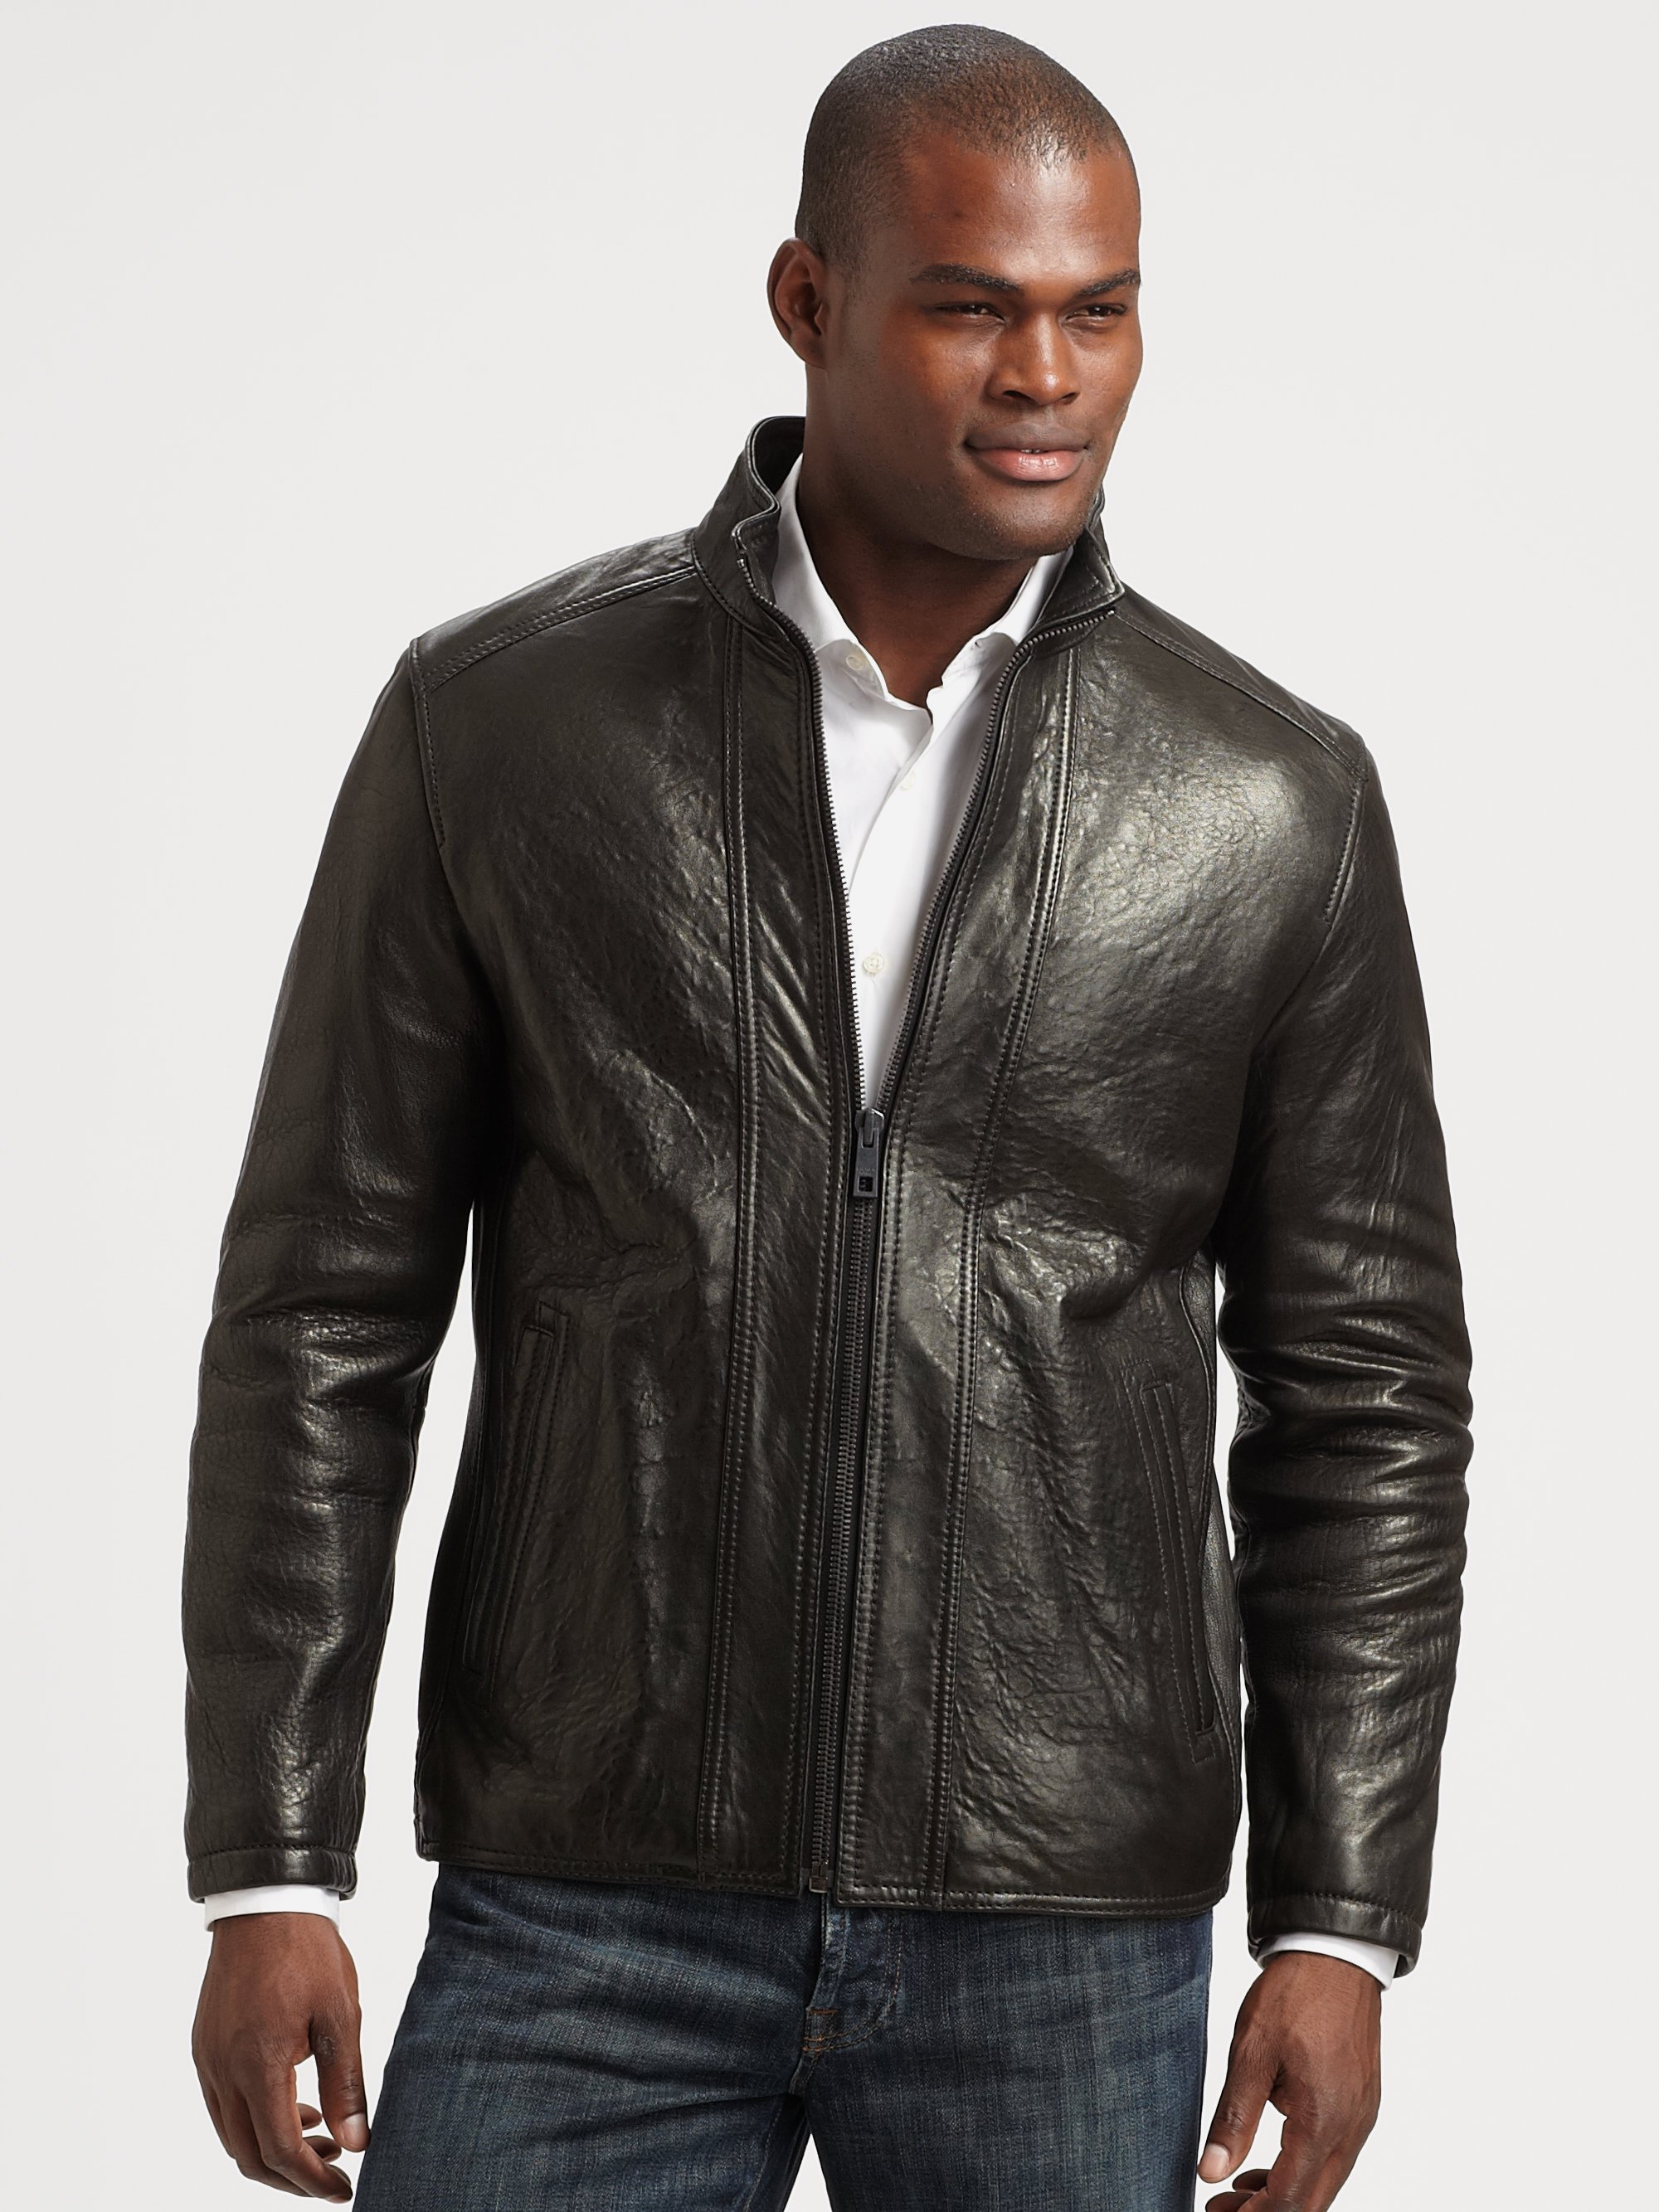 Lyst - Andrew marc French Rugged Leather Jacket in Black for Men